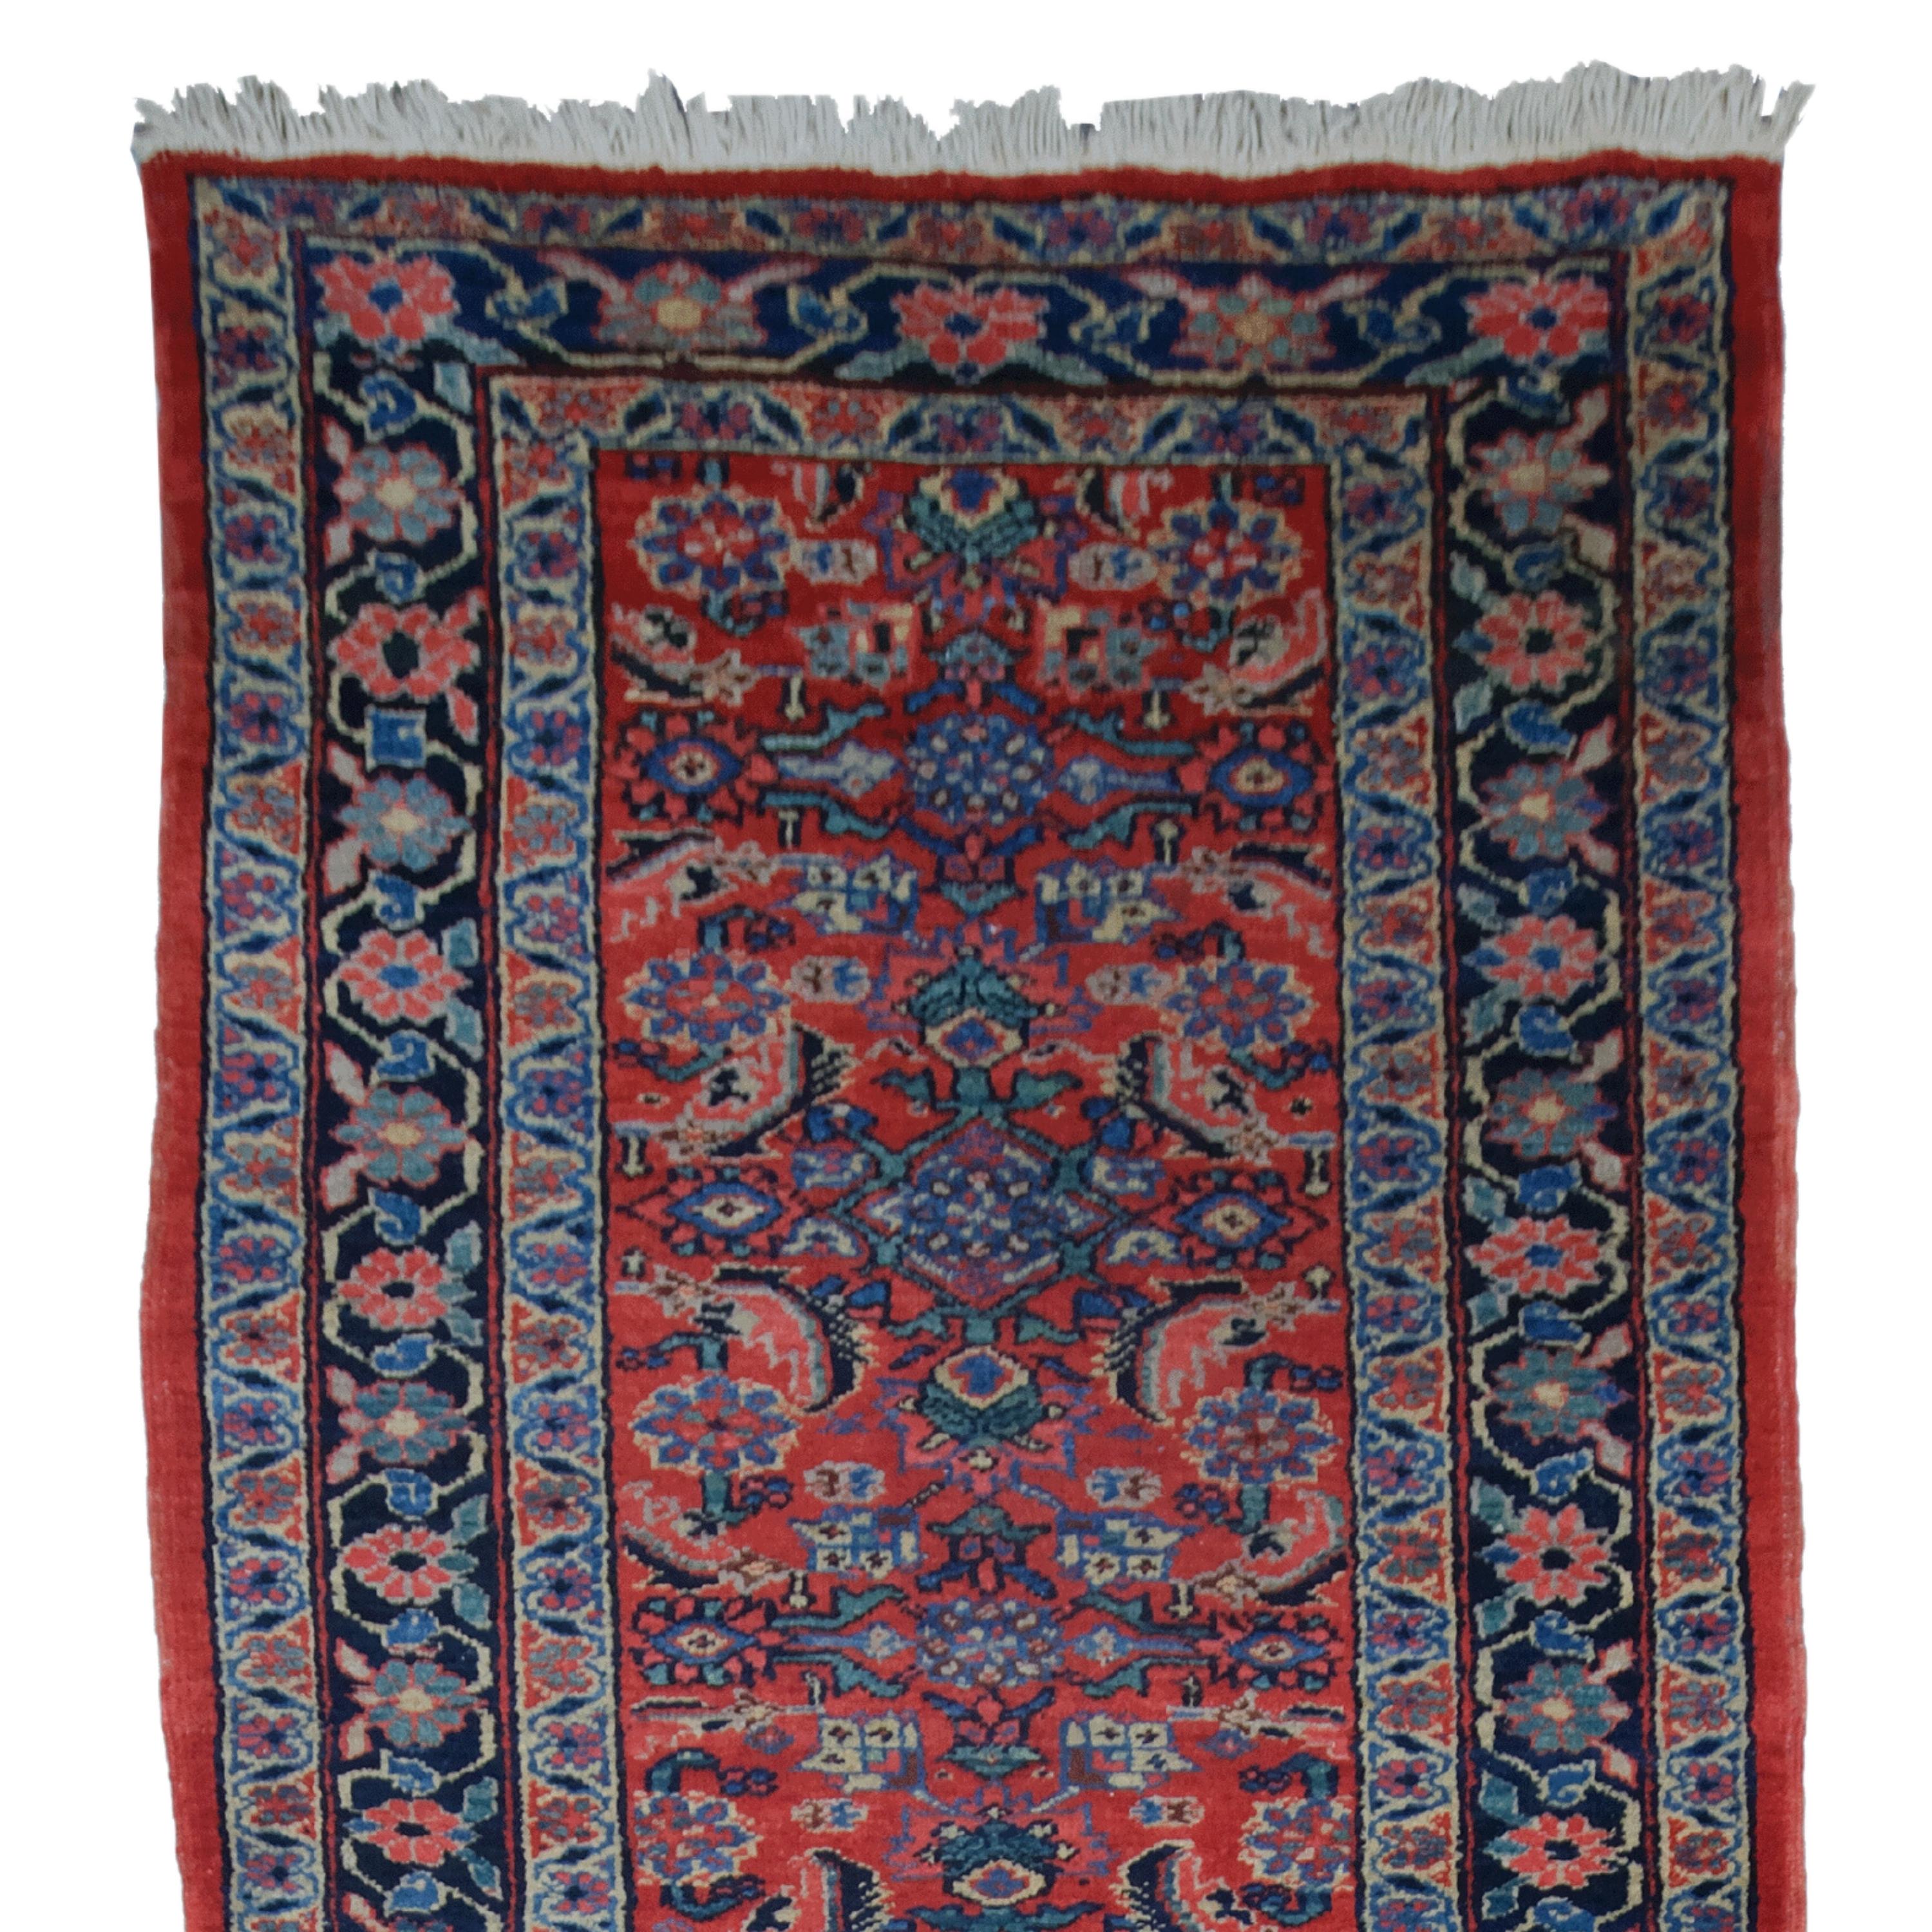 We offer a magnificent 19th century antique Heriz runner woven with historical richness and artistic skill. With its intricate patterns and vibrant colors, this runner is not just a carpet, but a work of art that adds warmth and style to any